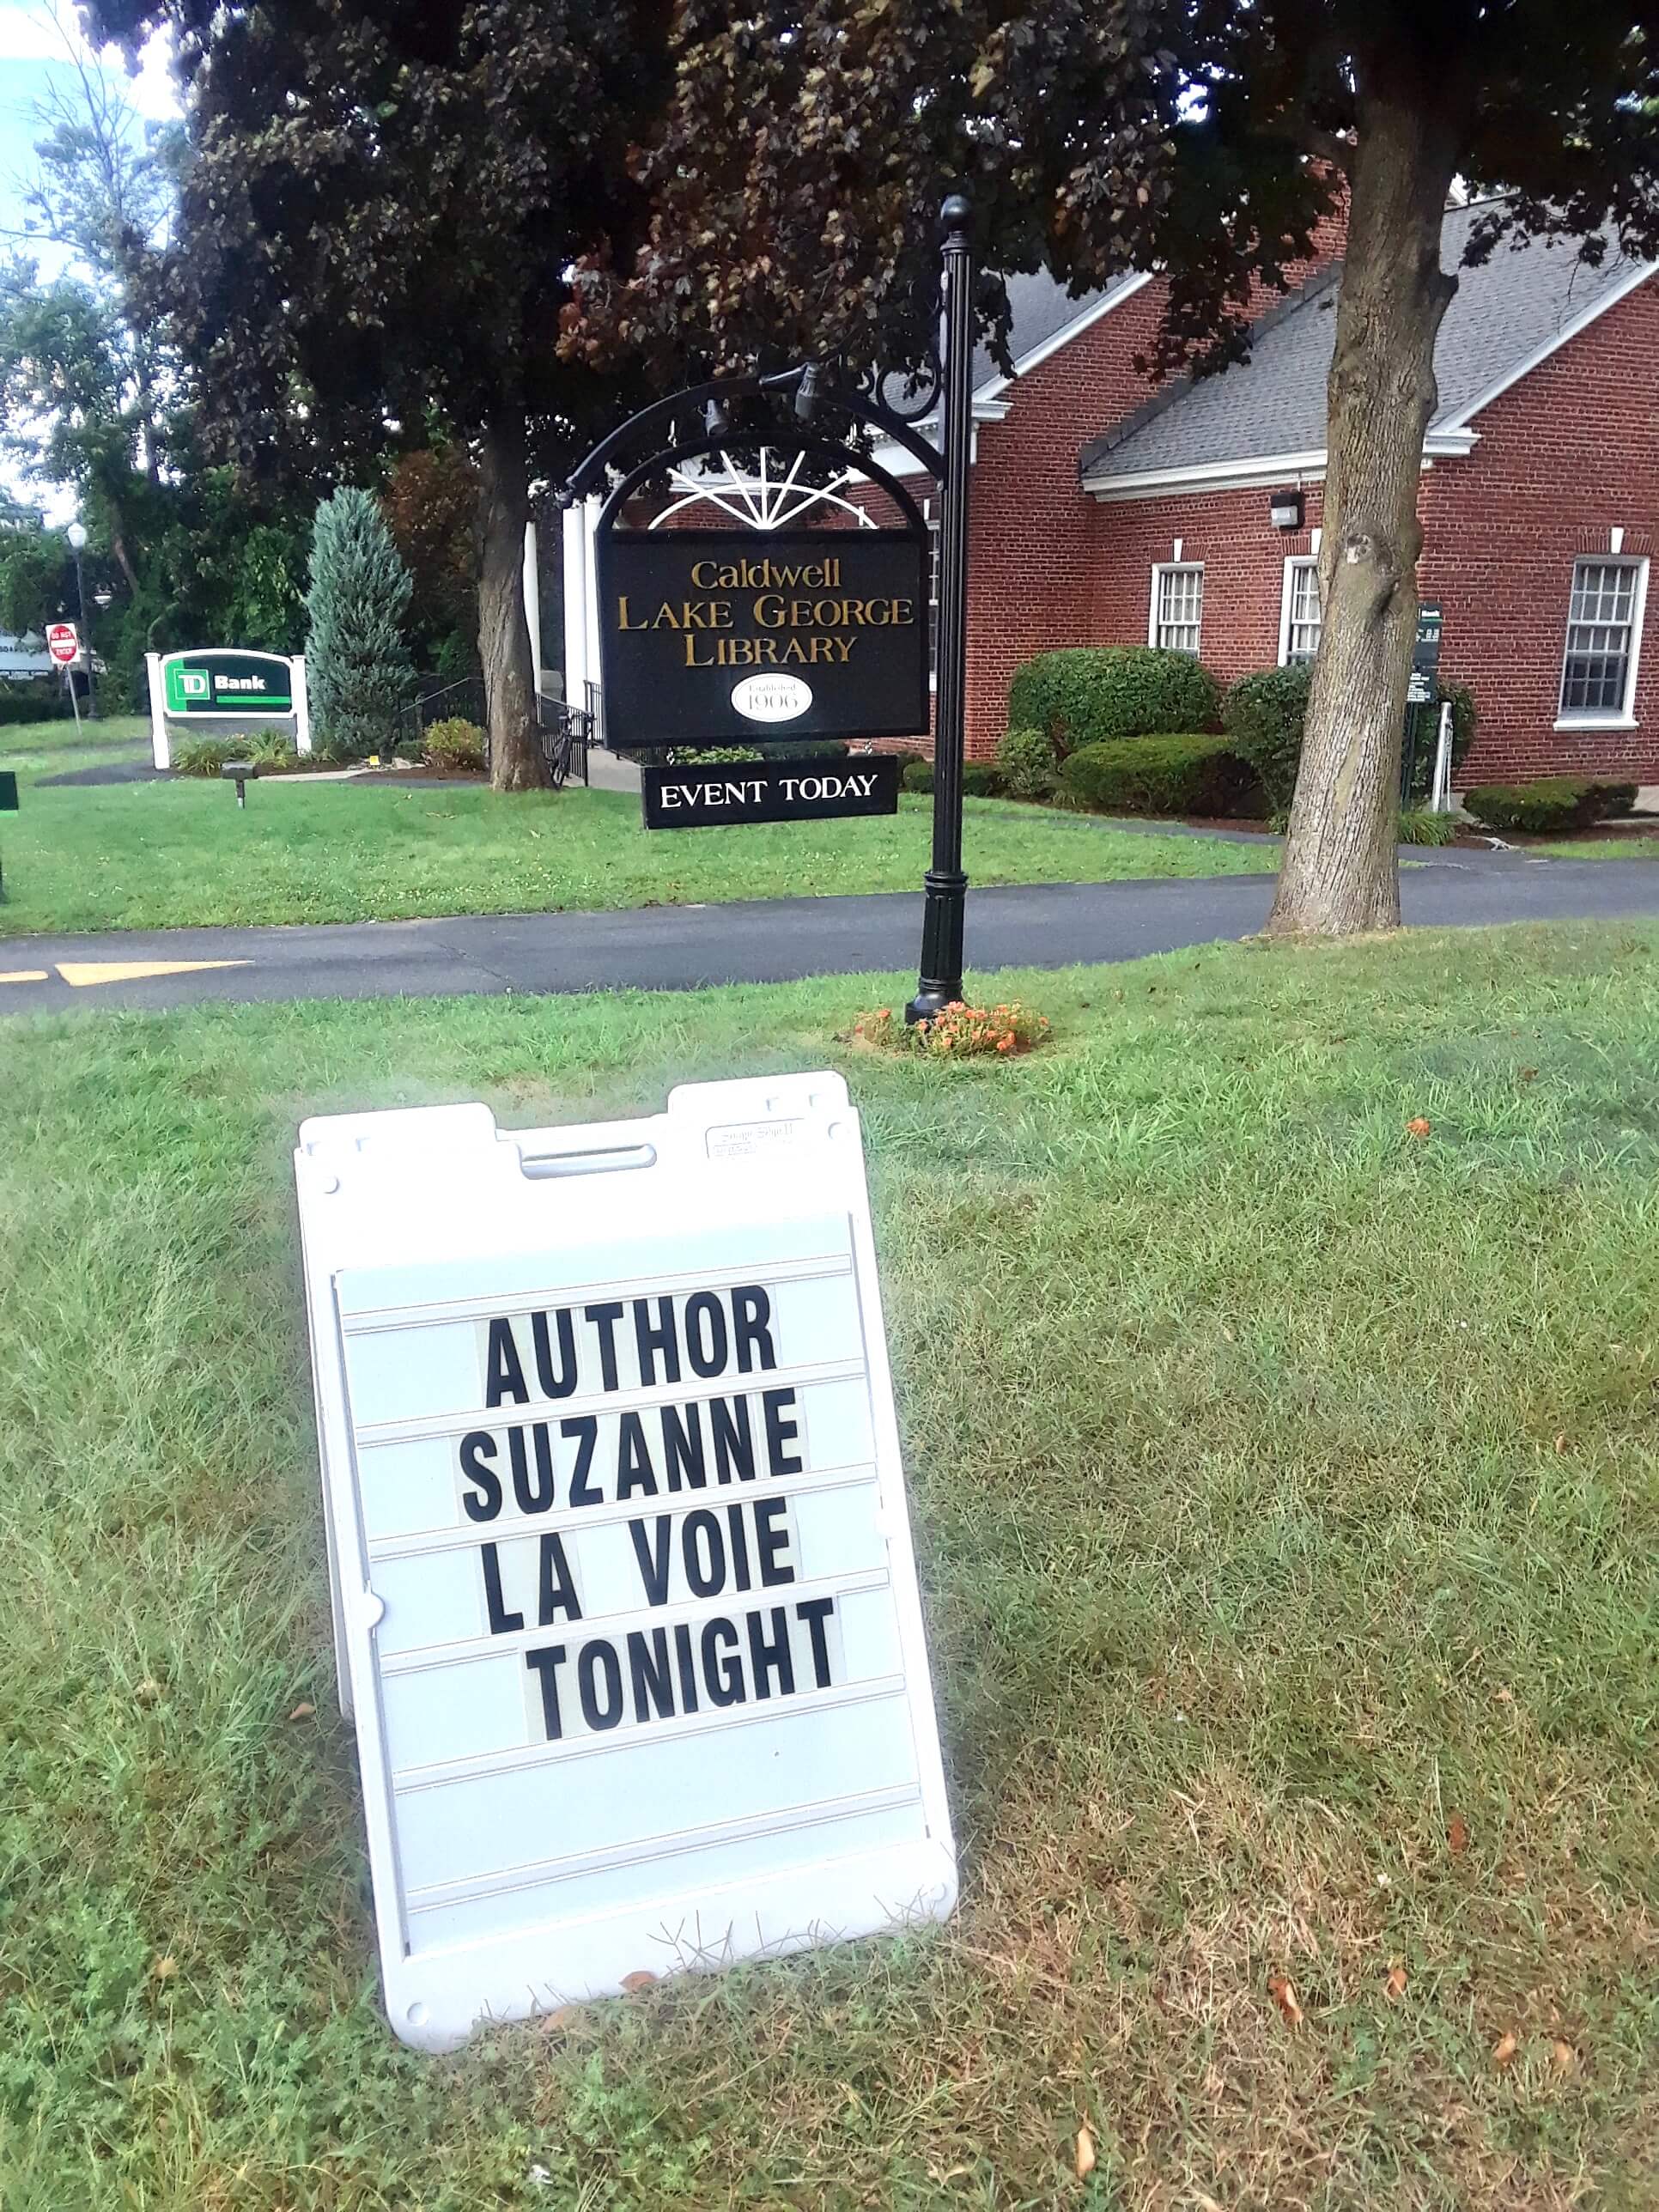 caldwell library sign showing suzanne lavoie's name